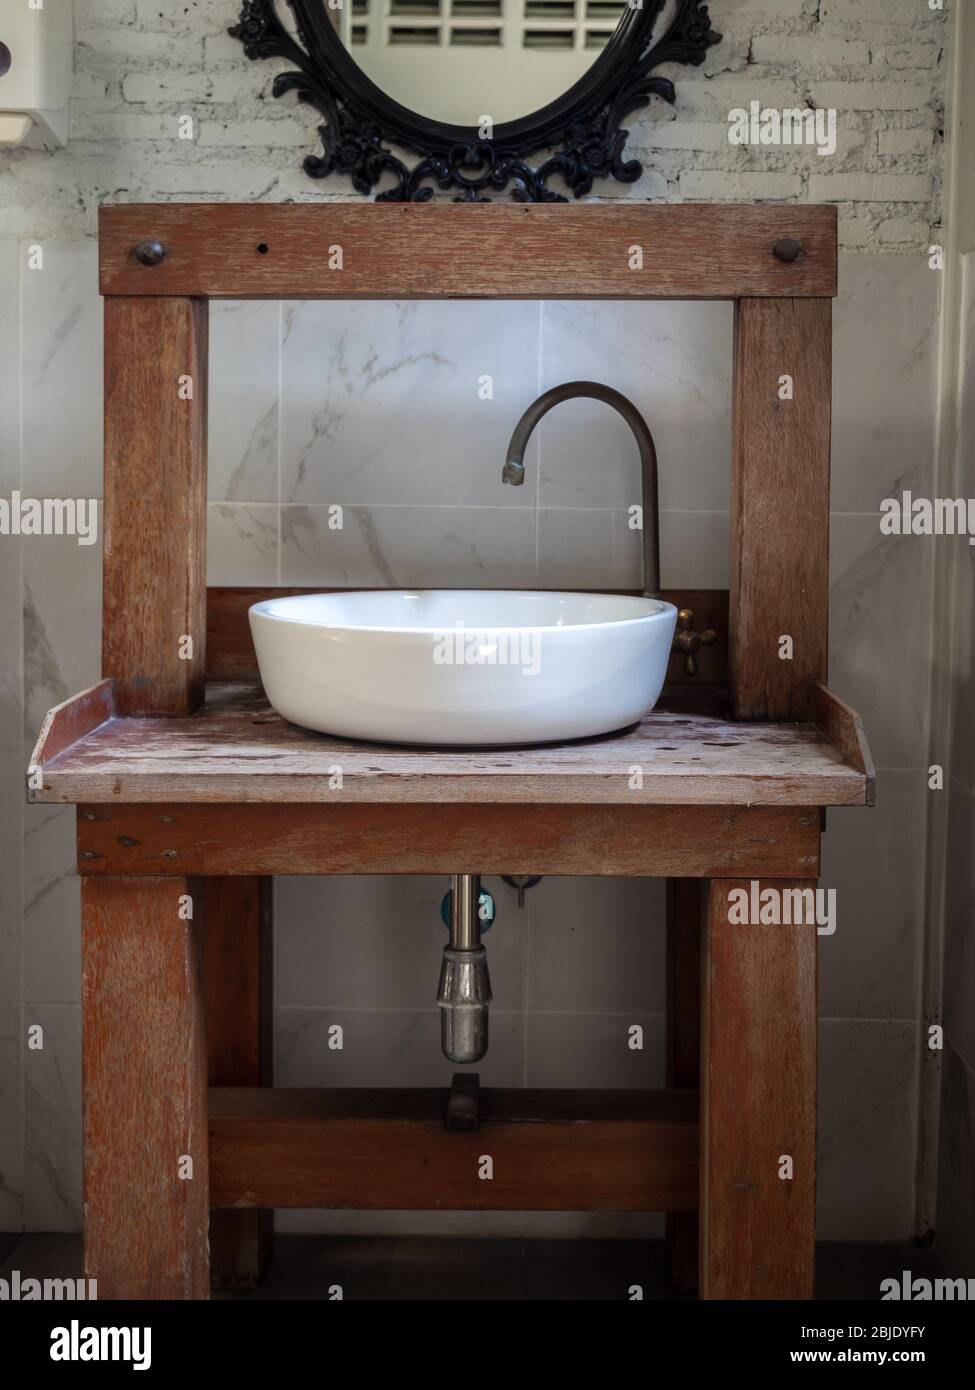 White Clean Ceramic Sink Bath And Faucet On Vintage Wooden Table